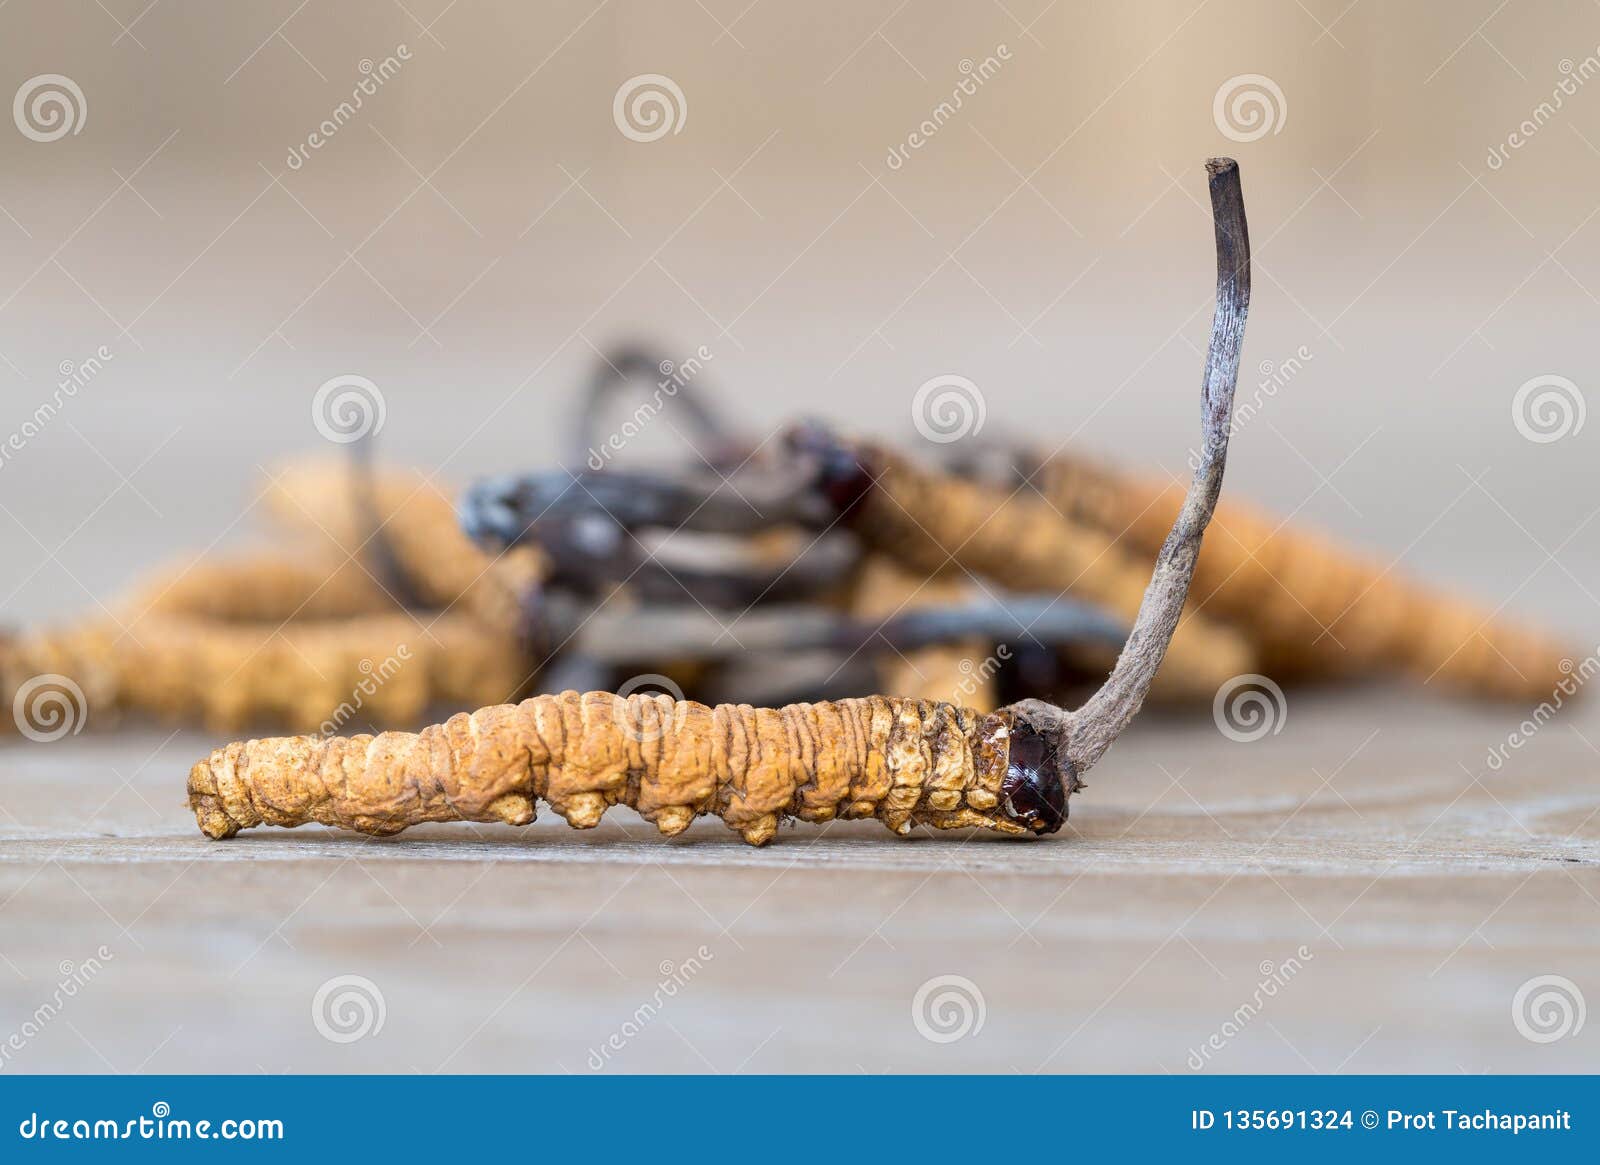 group of mushroom cordyceps or ophiocordyceps sinensis this is a herbs on wooden table. medicinal properties in the treatment of d